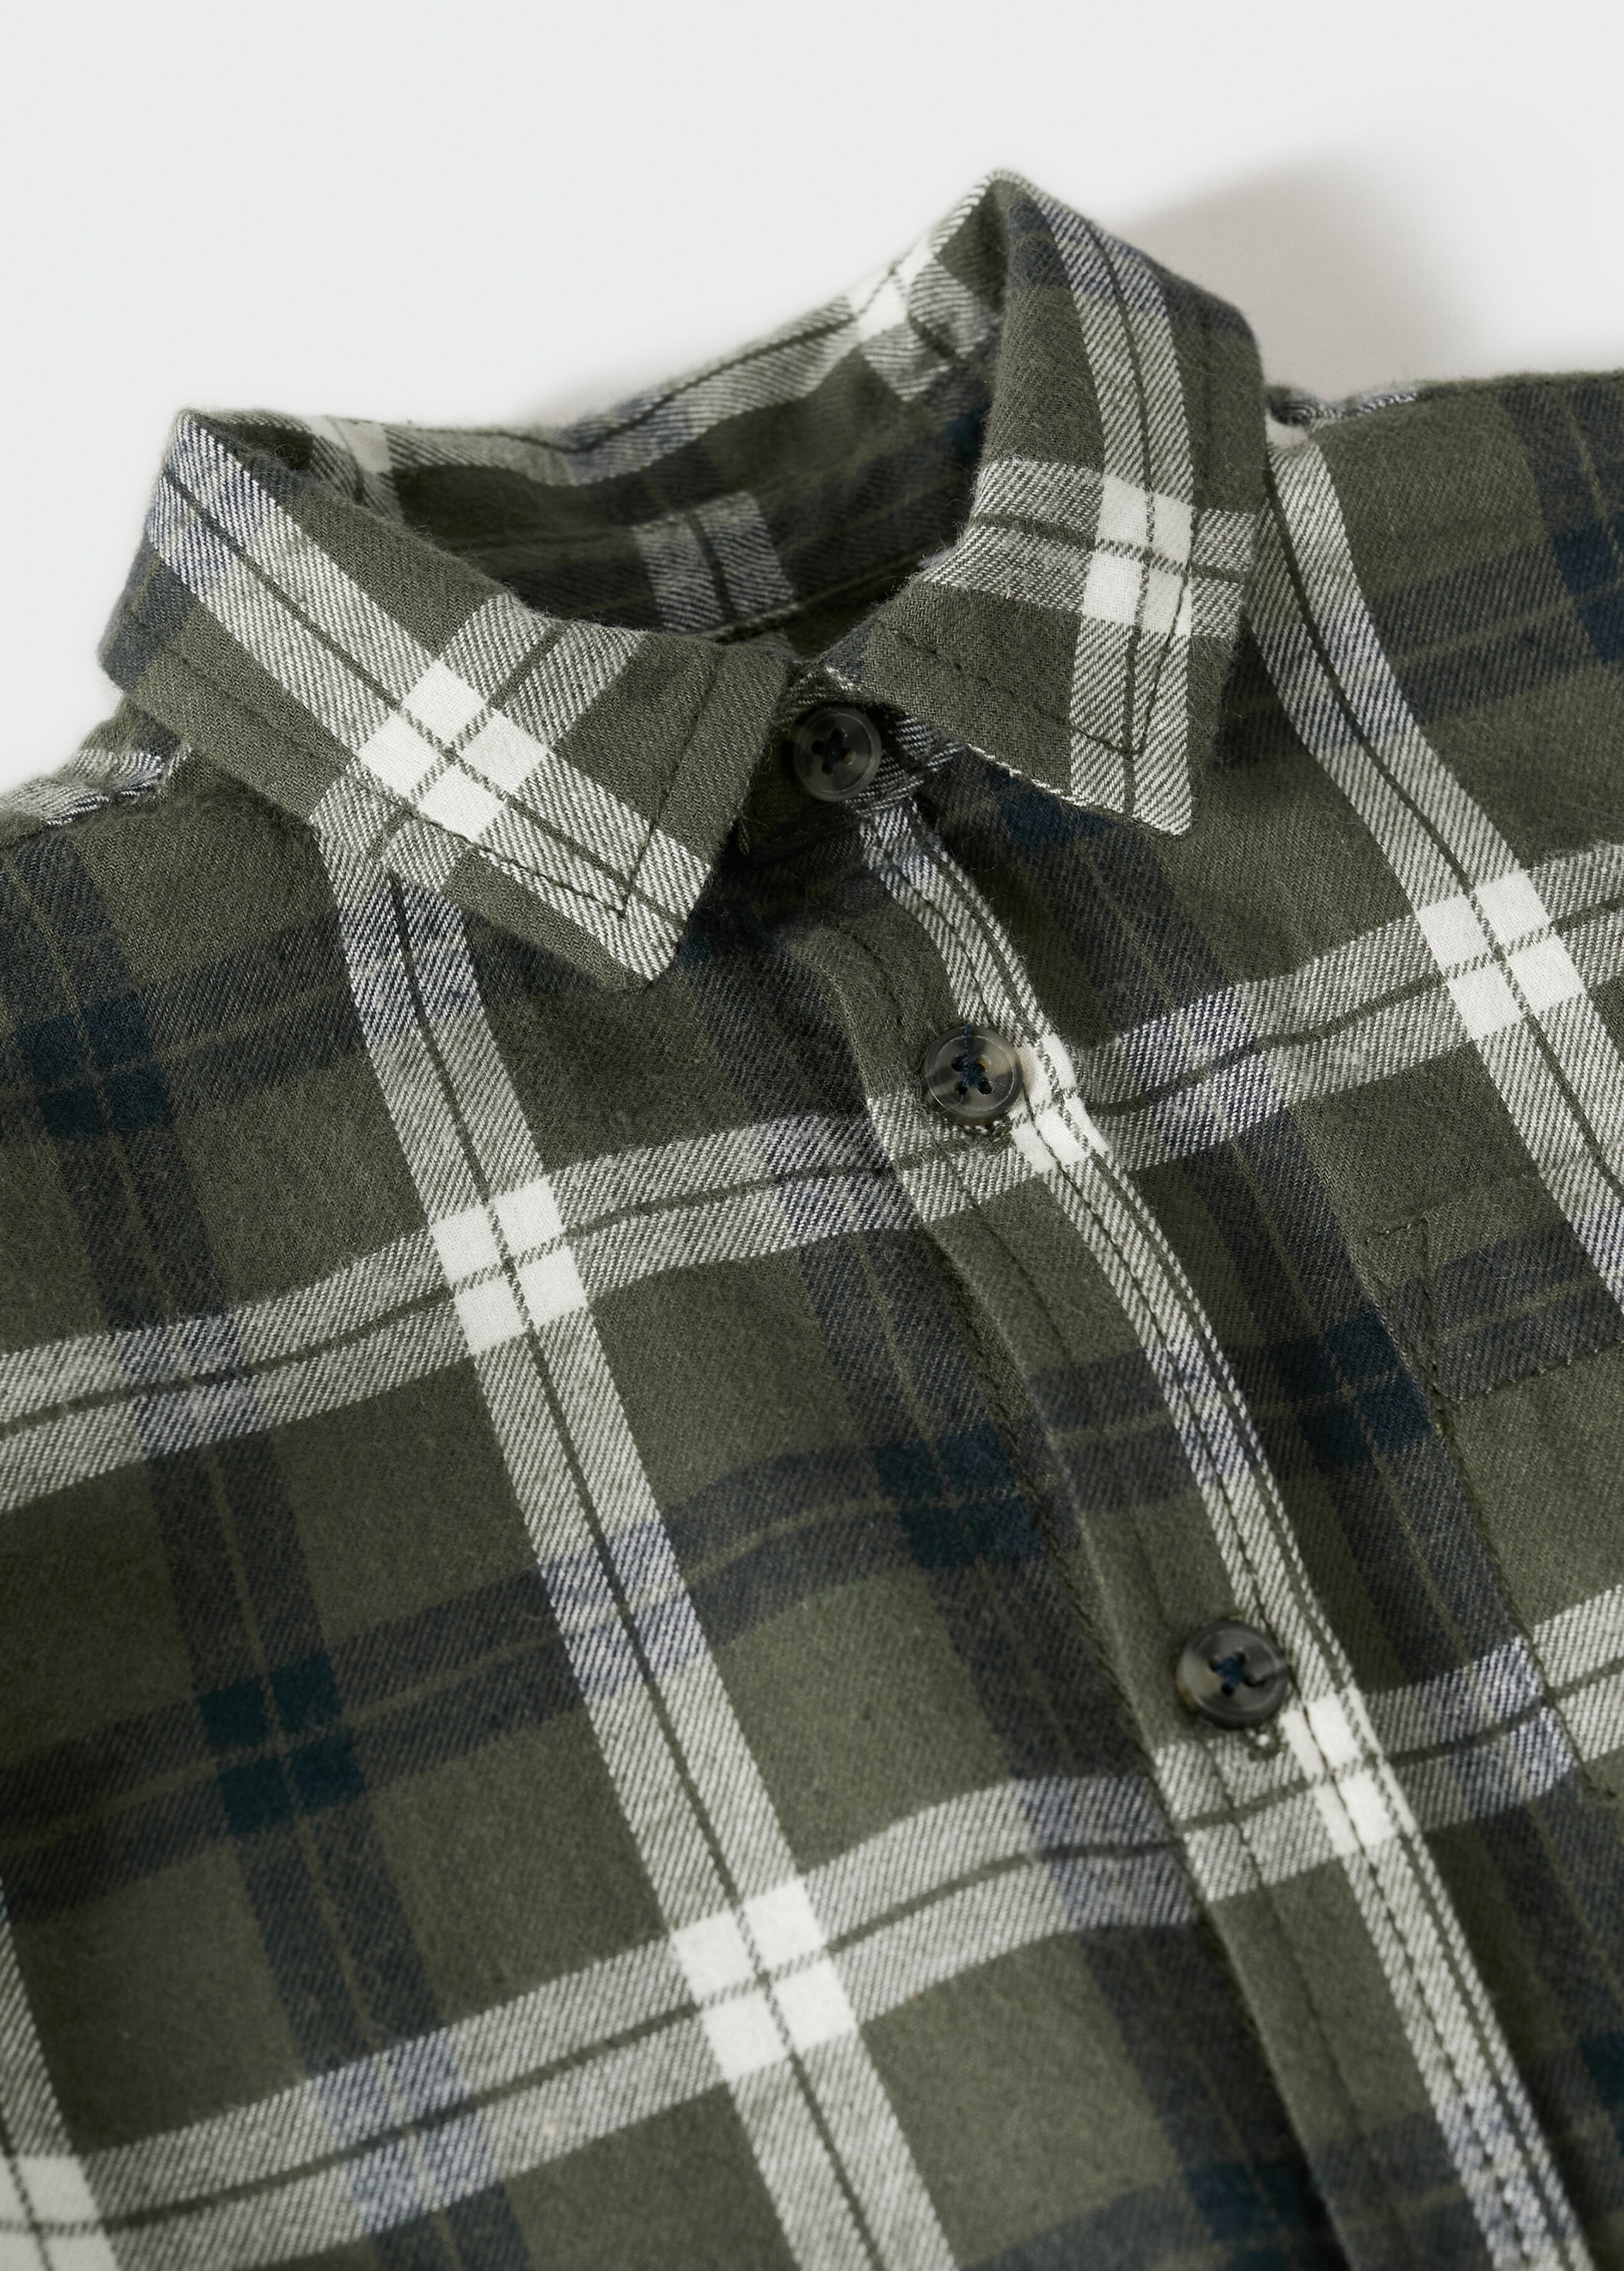 Check cotton shirt - Details of the article 8